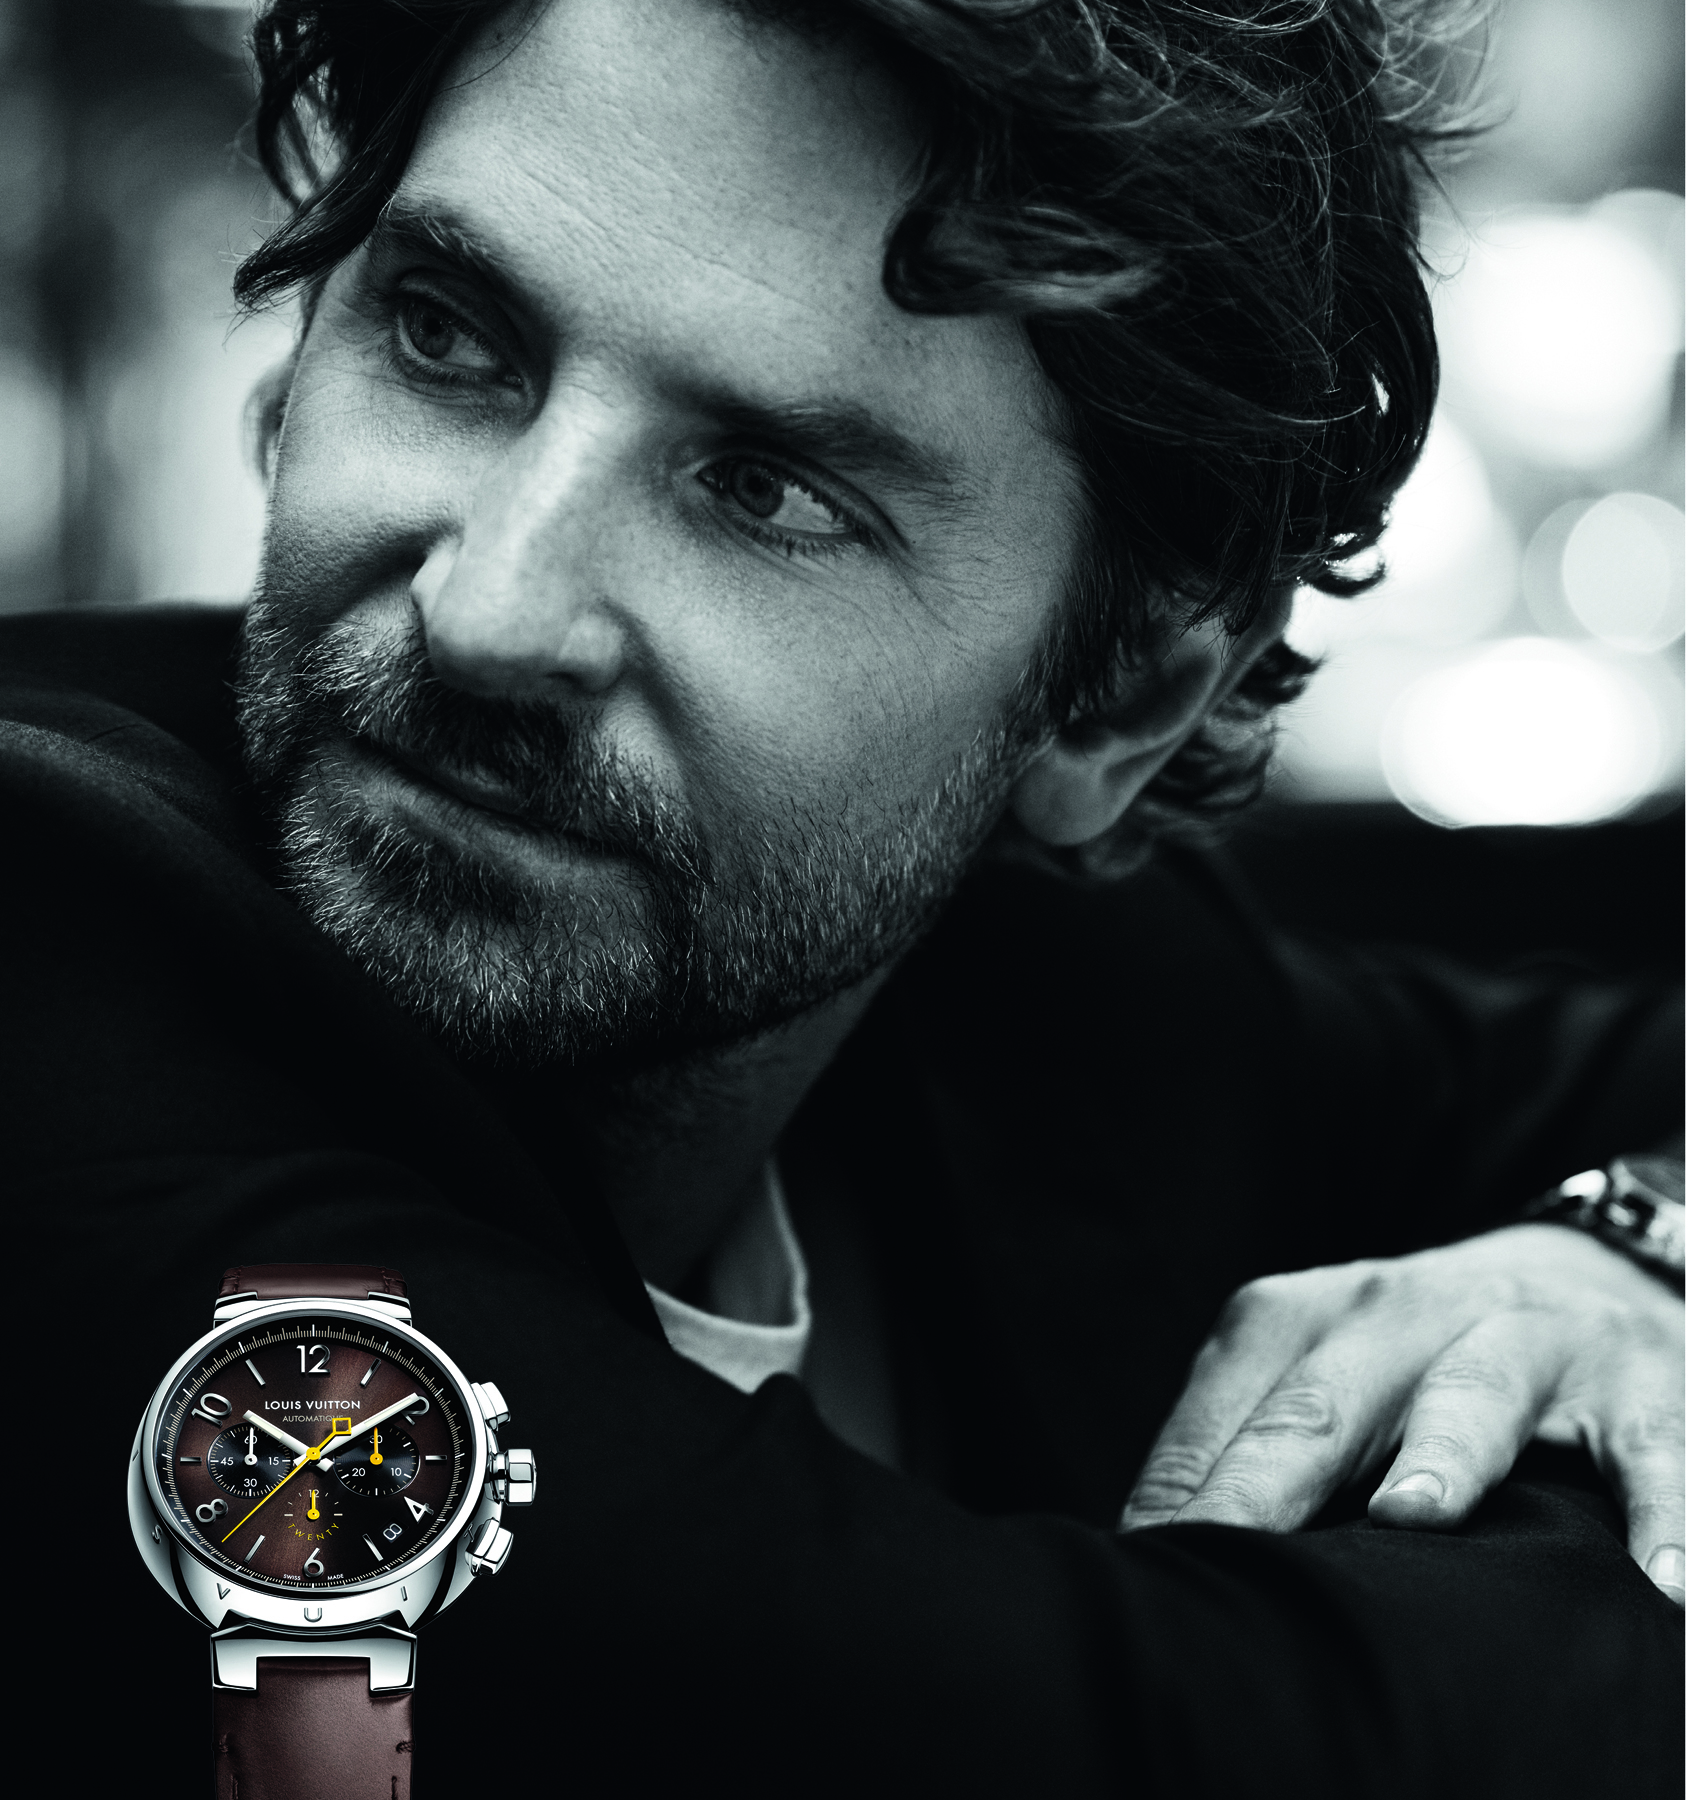 Bradley Cooper fronts campaign for 20th anniversary Louis Vuitton Tambour